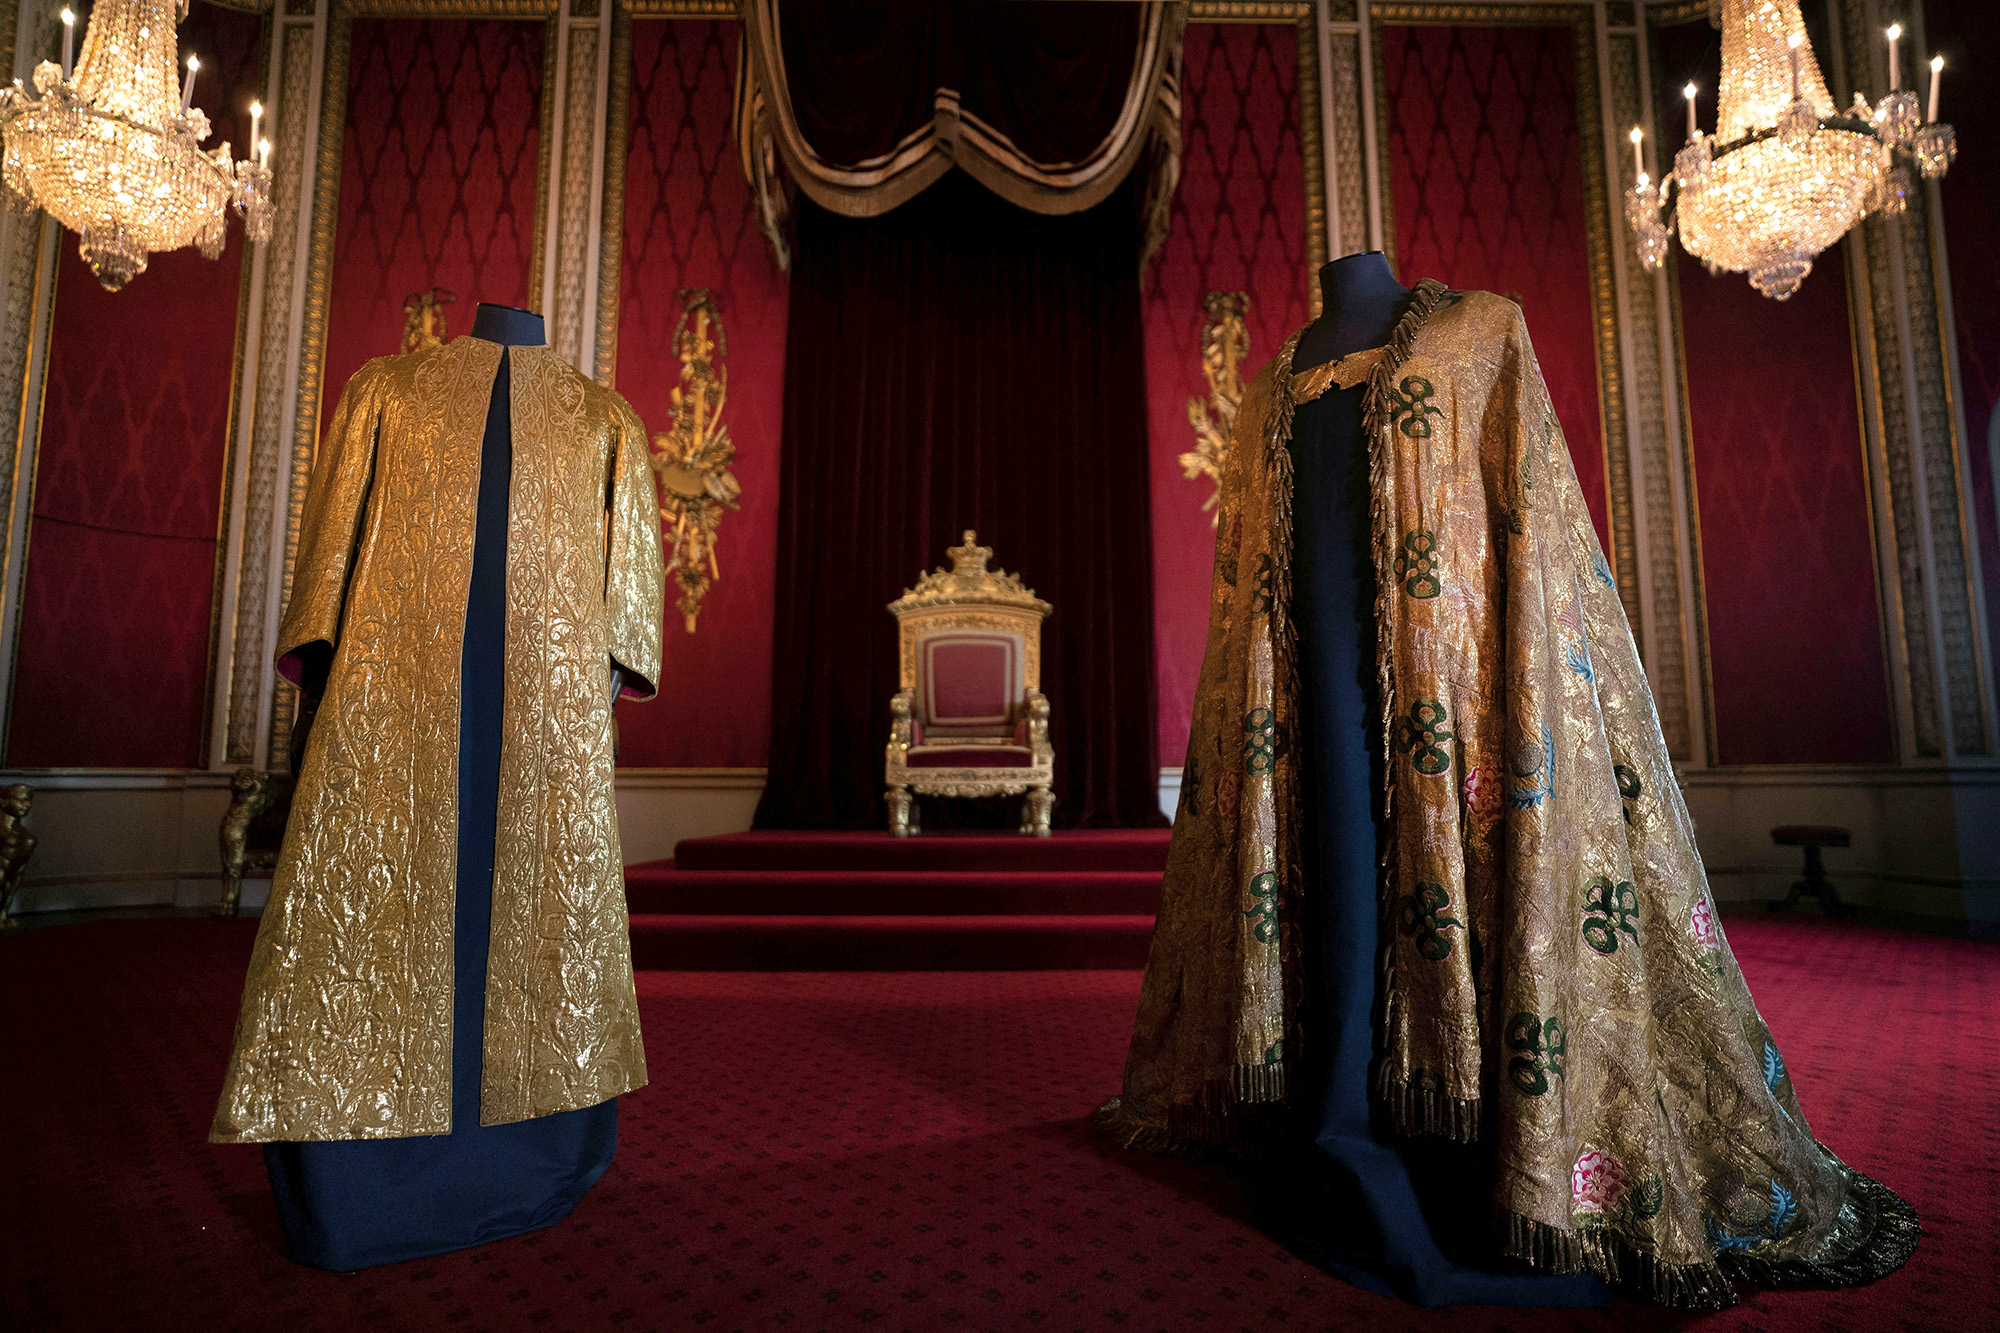 The Coronation Vestments, comprising of the Supertunica and the Imperial Mantle, which will be worn by Britain's King Charles III during his coronation, displayed in the Throne Room at Buckingham Palace, London, on April 26.